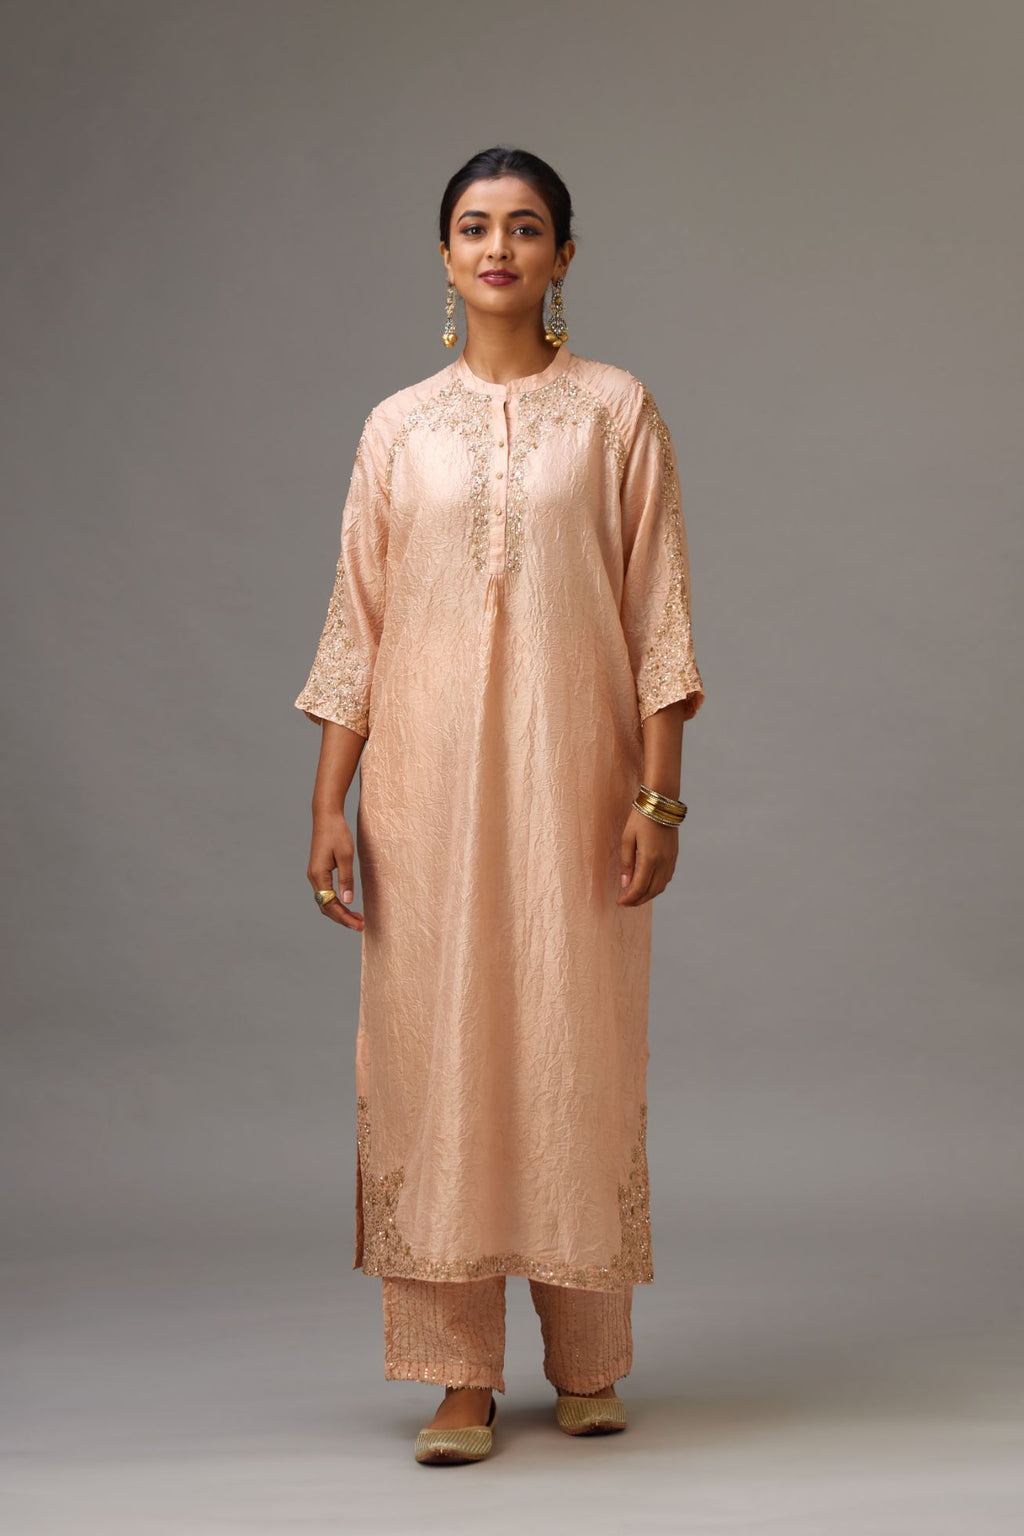 Pink silk hand crushed kurta set with button placket neckline, highlighted with gold sequins work at hem, neck and armhole.